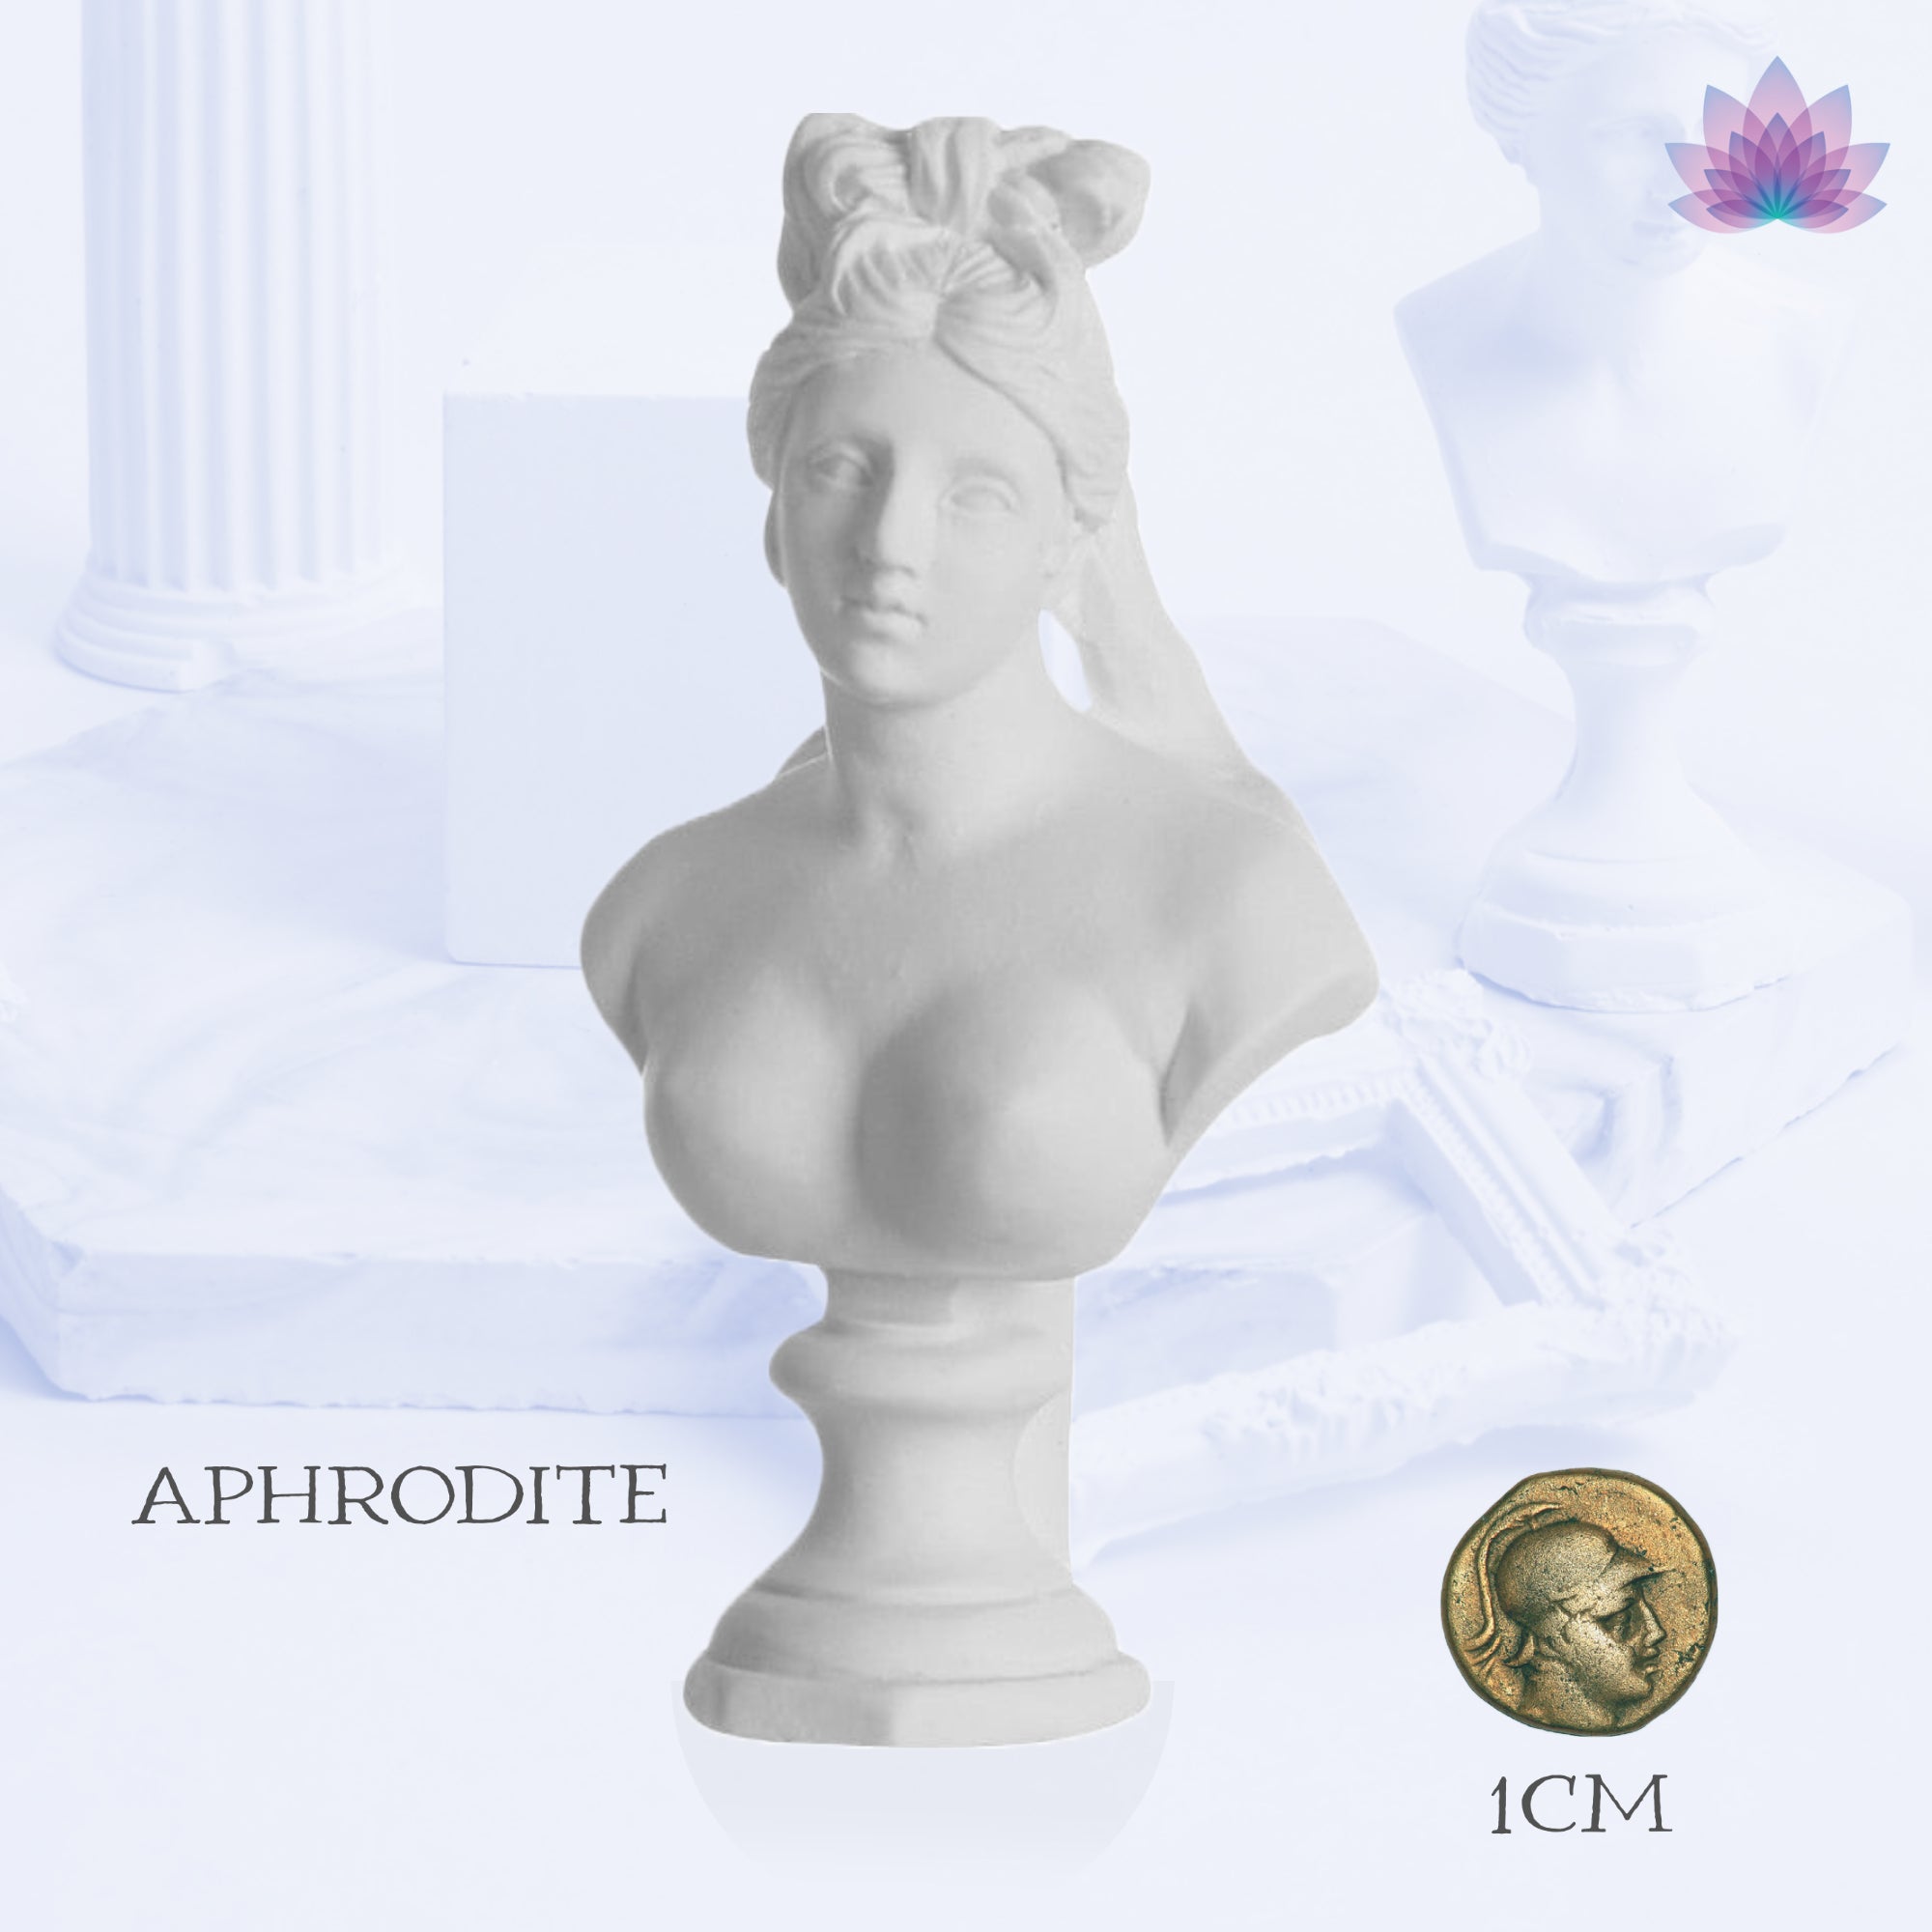 Small Greek Mythology Resin Bust Statues Of Gods And Goddesses Apollo, Athena, Aphrodite, Hermes & Ares | Deity Worship Altar Statue For Pagan Witchcraft Rituals | Drawing Practice Sculpture Props | Apollo Tarot Shop